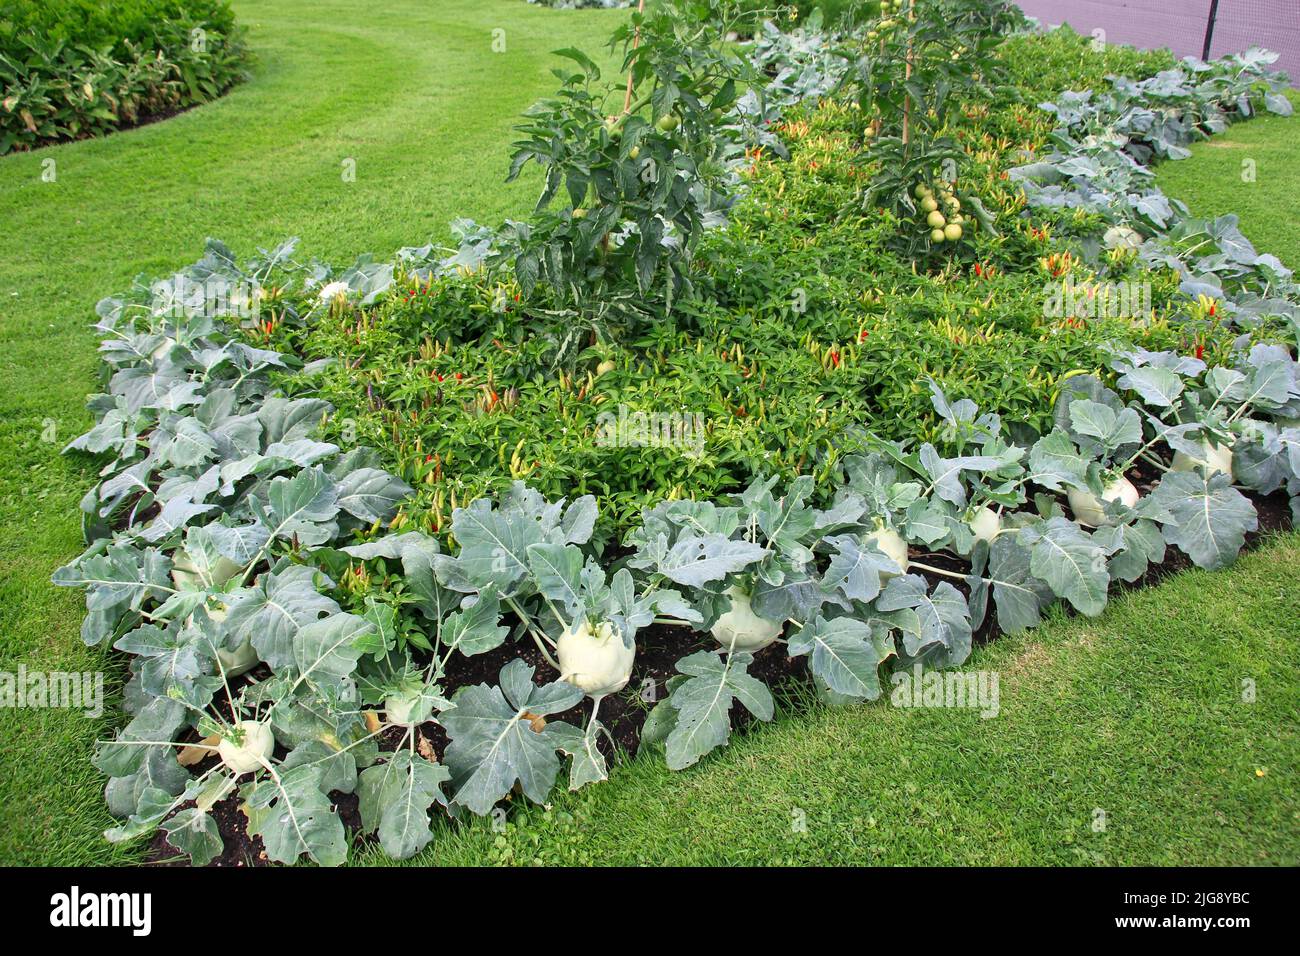 Beautifully decorated flowerbed of vegetables in public park in London. Beautiful decor of red chili, kohlrabi, tomatoes growing in garden Stock Photo